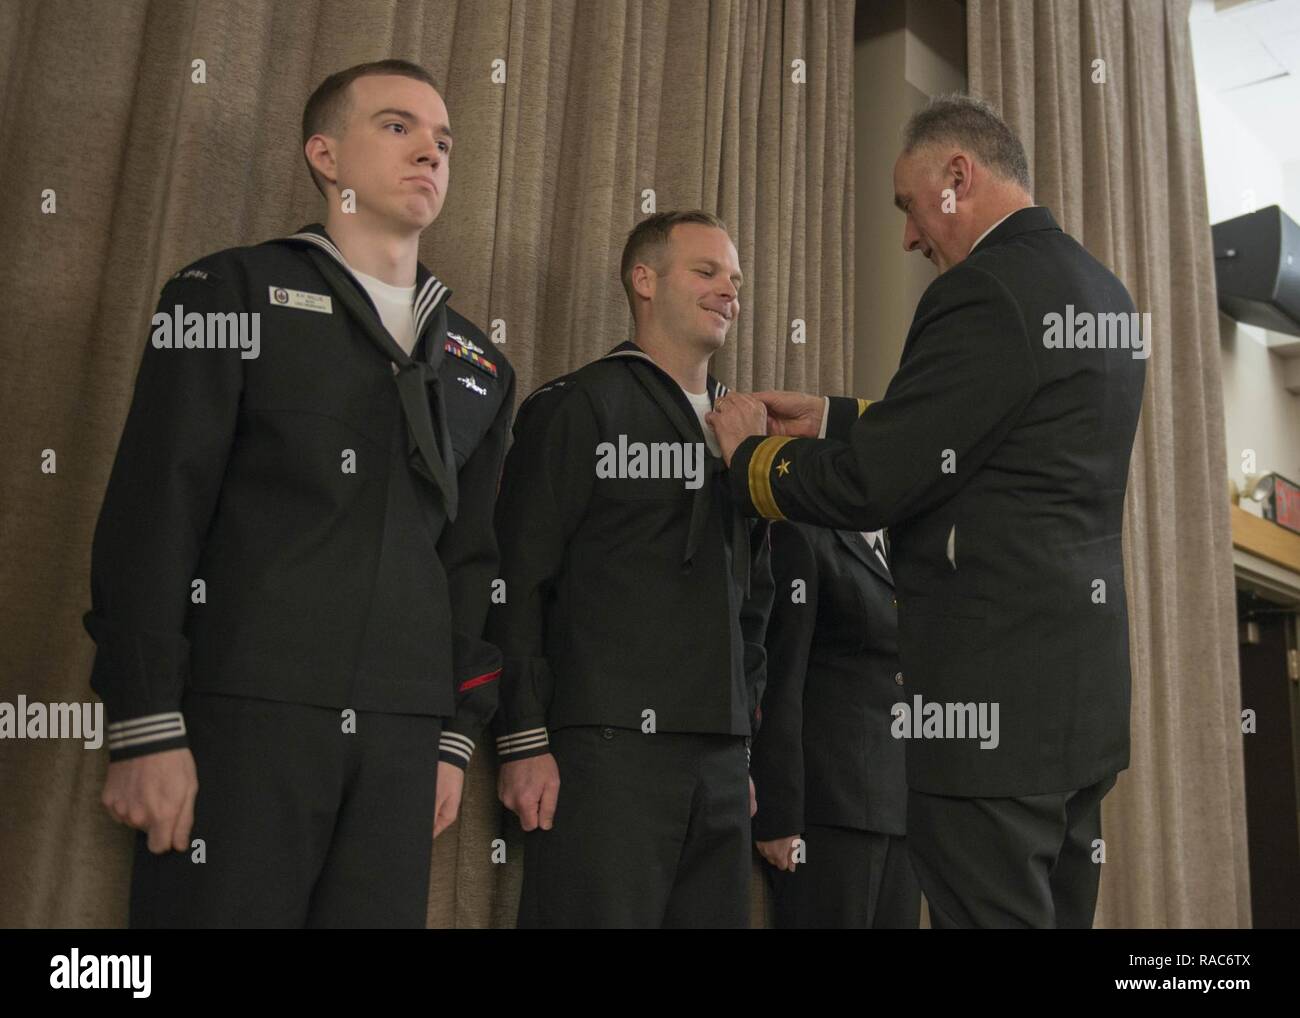 BANGOR, Wash. (Jan. 17, 2017) Rear Adm. John Tammen, commander, Submarine Group 9, congratulates Culinary Specialist 2nd Class Bradley White, from Cincinnati, Ohio, assigned to Submarine Group 9, on becoming the 2016 Shore Junior Sailor of the Year. The Shore Sailor of the Year Program was introduced in 1973, by former Chief of Naval Operations Adm. Elmo Zumwalt, to recognize superior performance at every command. Stock Photo